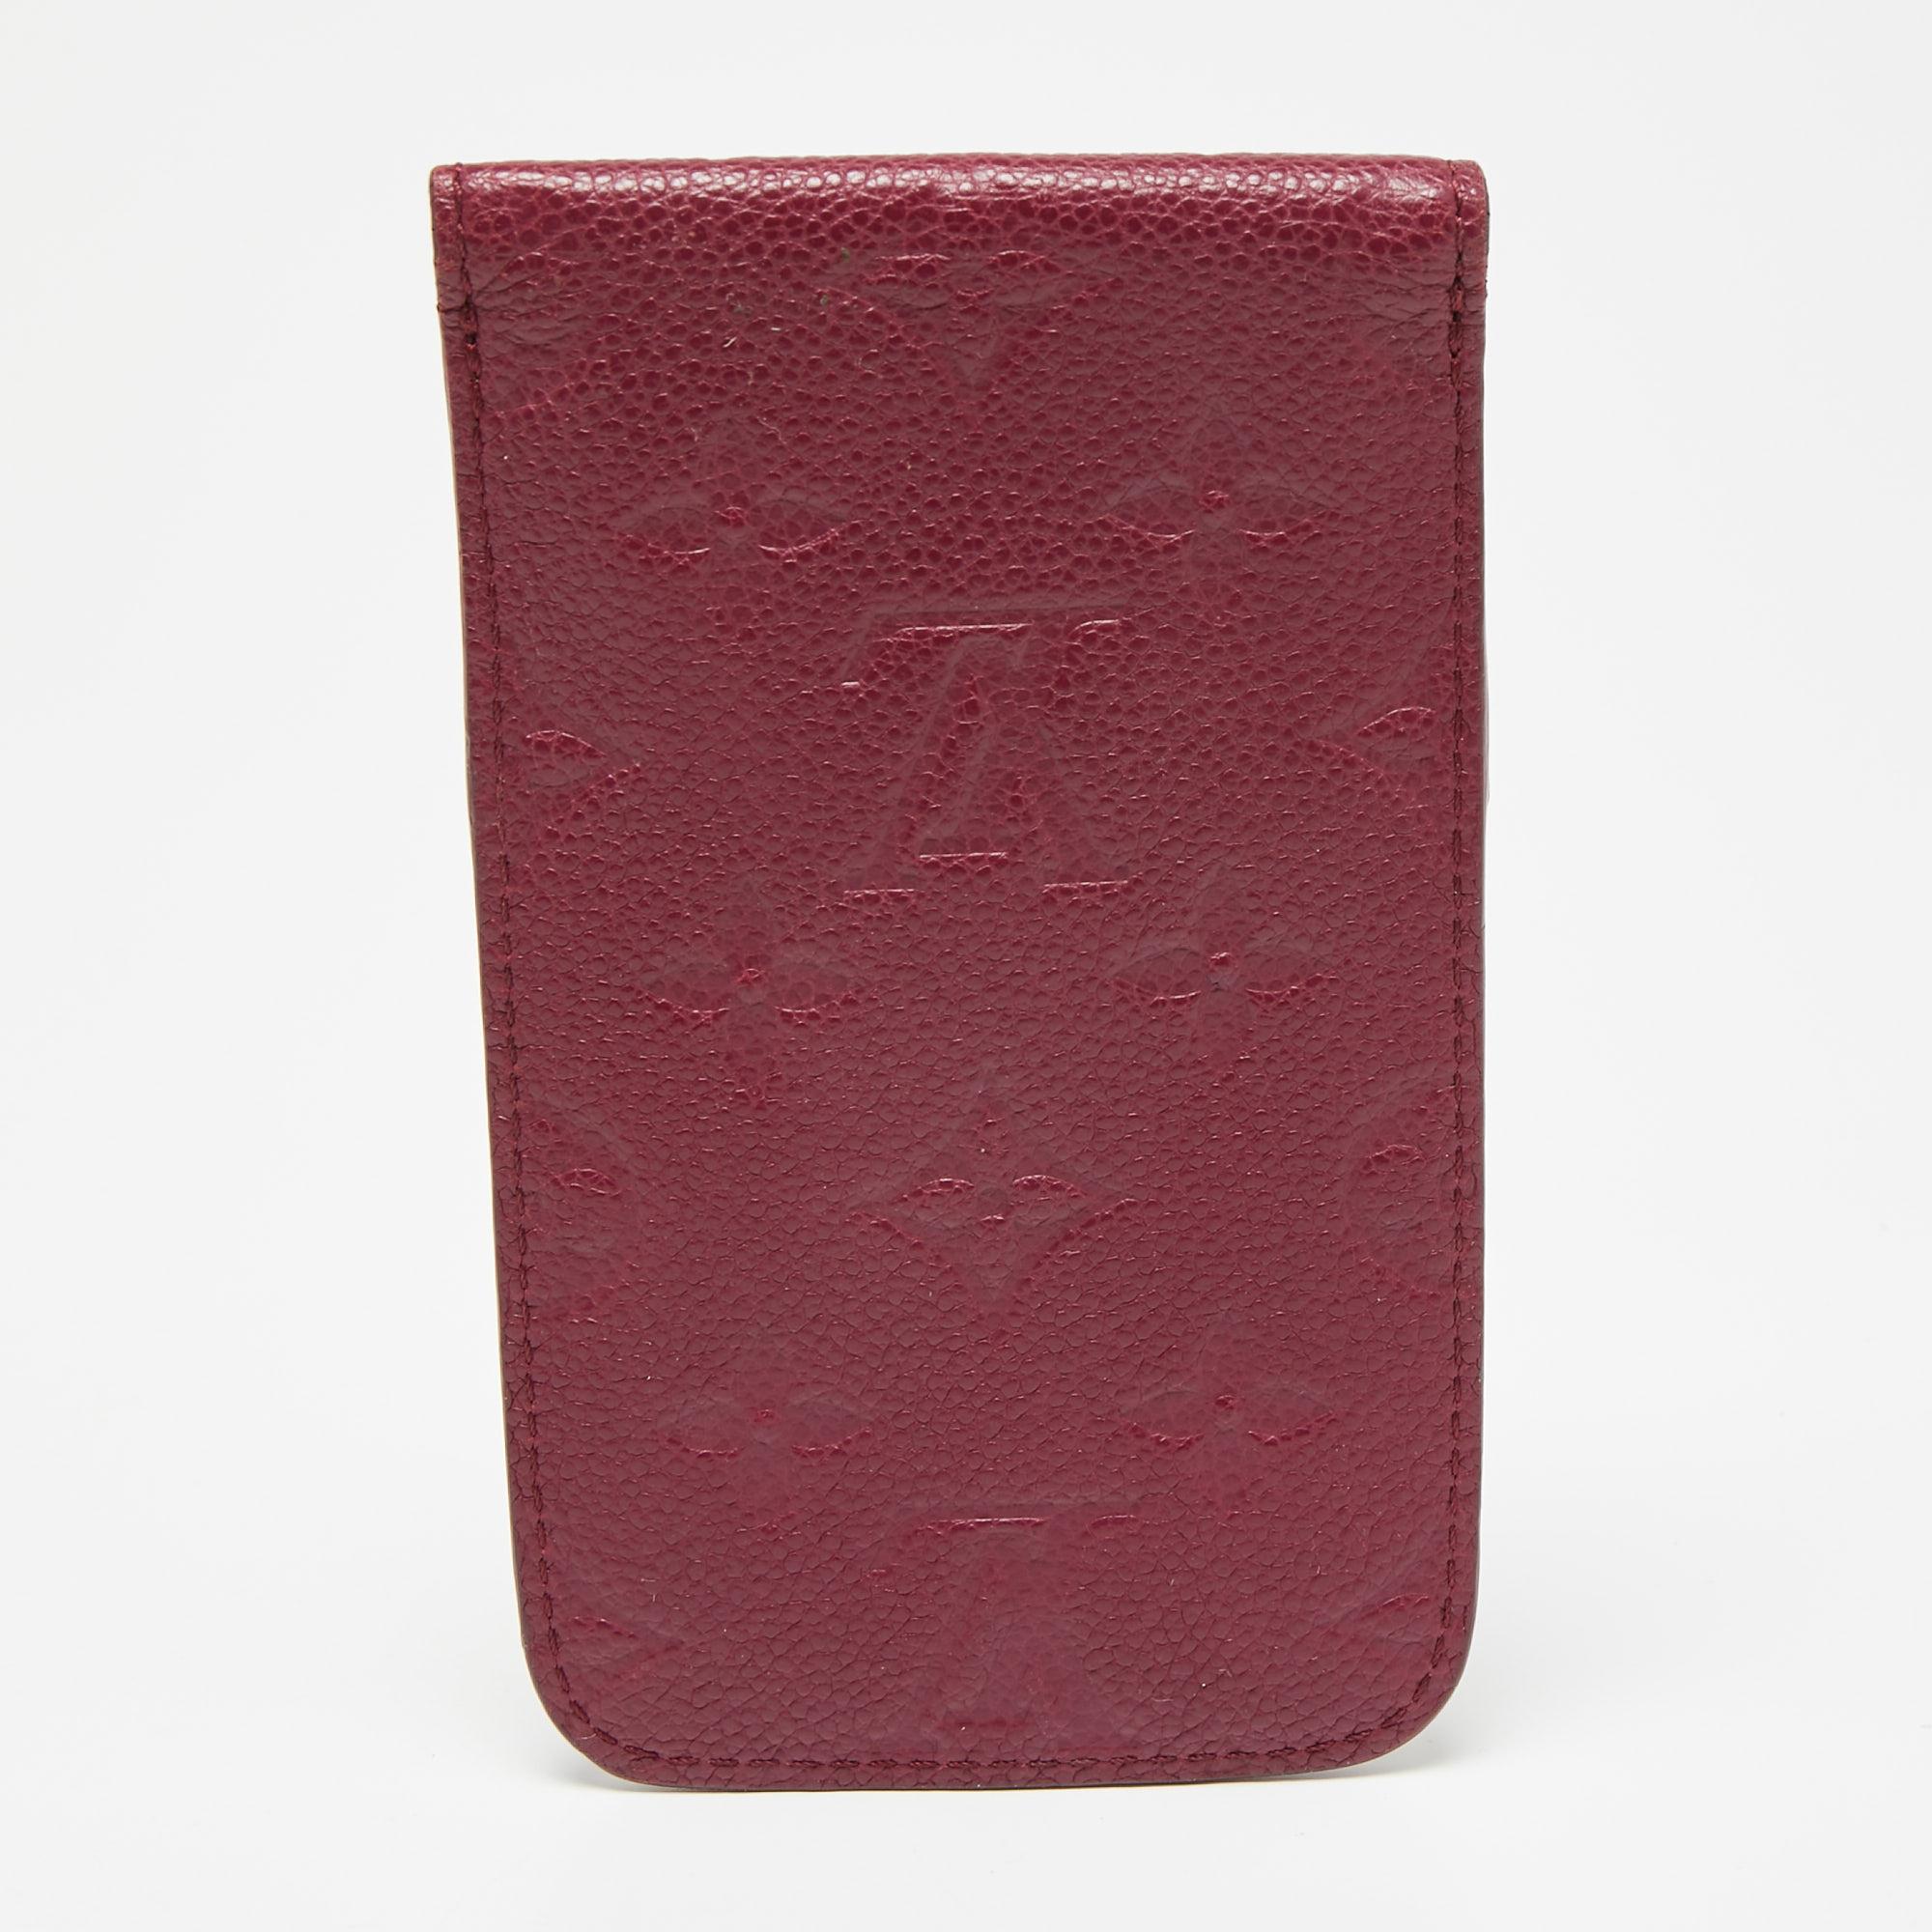 What's not to love about items that are both functional and worthy to be flaunted! This stunning Louis Vuitton case has been designed smartly to safeguard your phone from any bumps, scratches, and dust. Made from Monogram Empreinte leather, the case